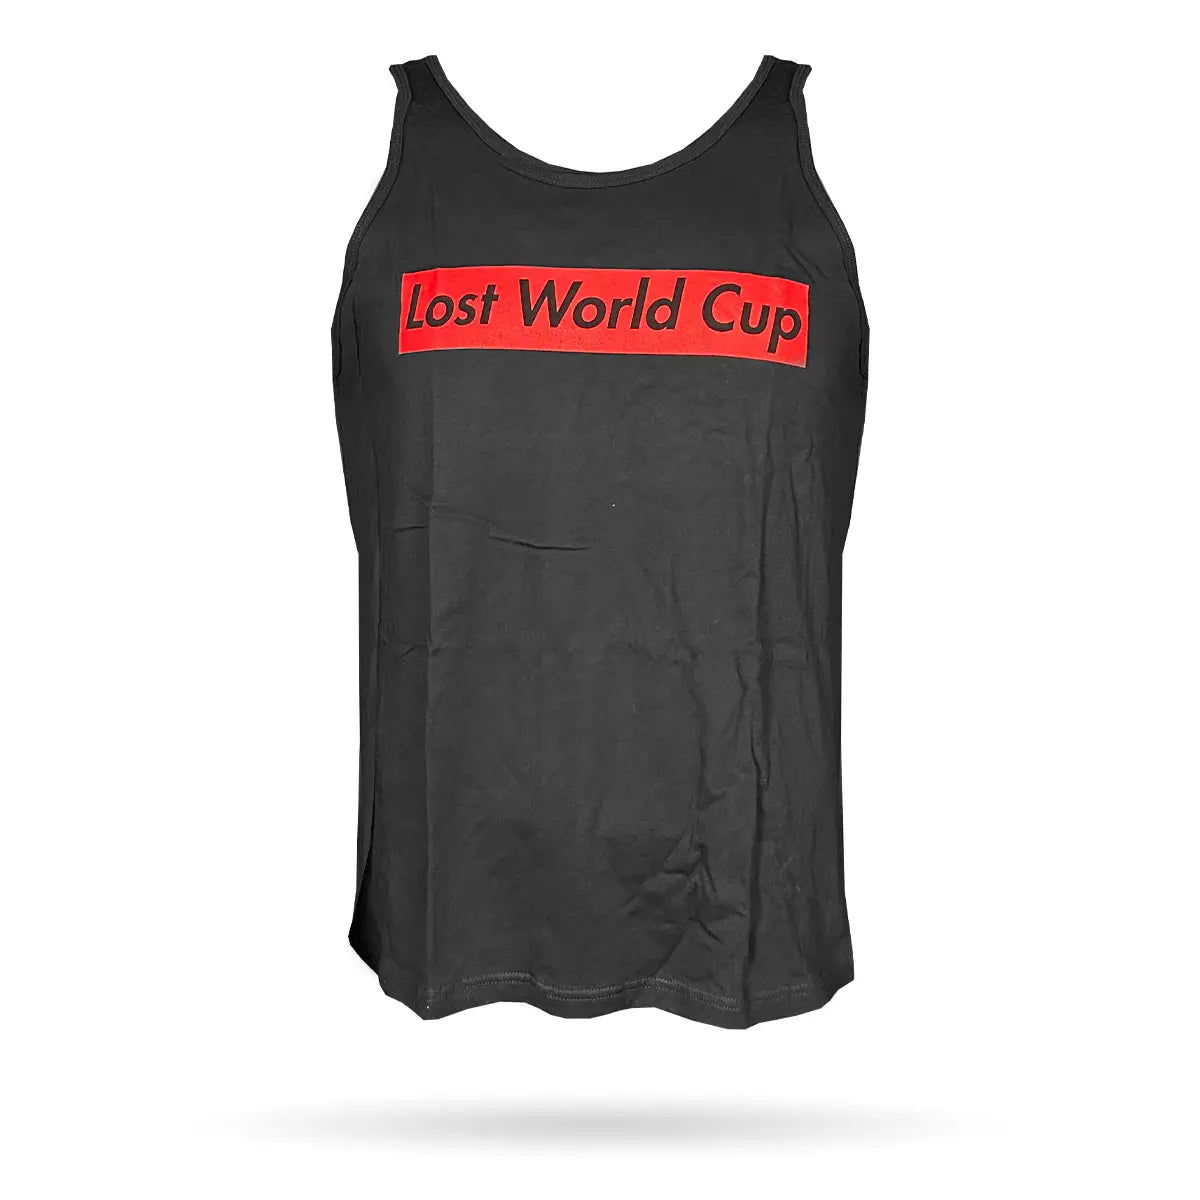 LOST WORLD CUP - TANK TOP Infamous Paintball